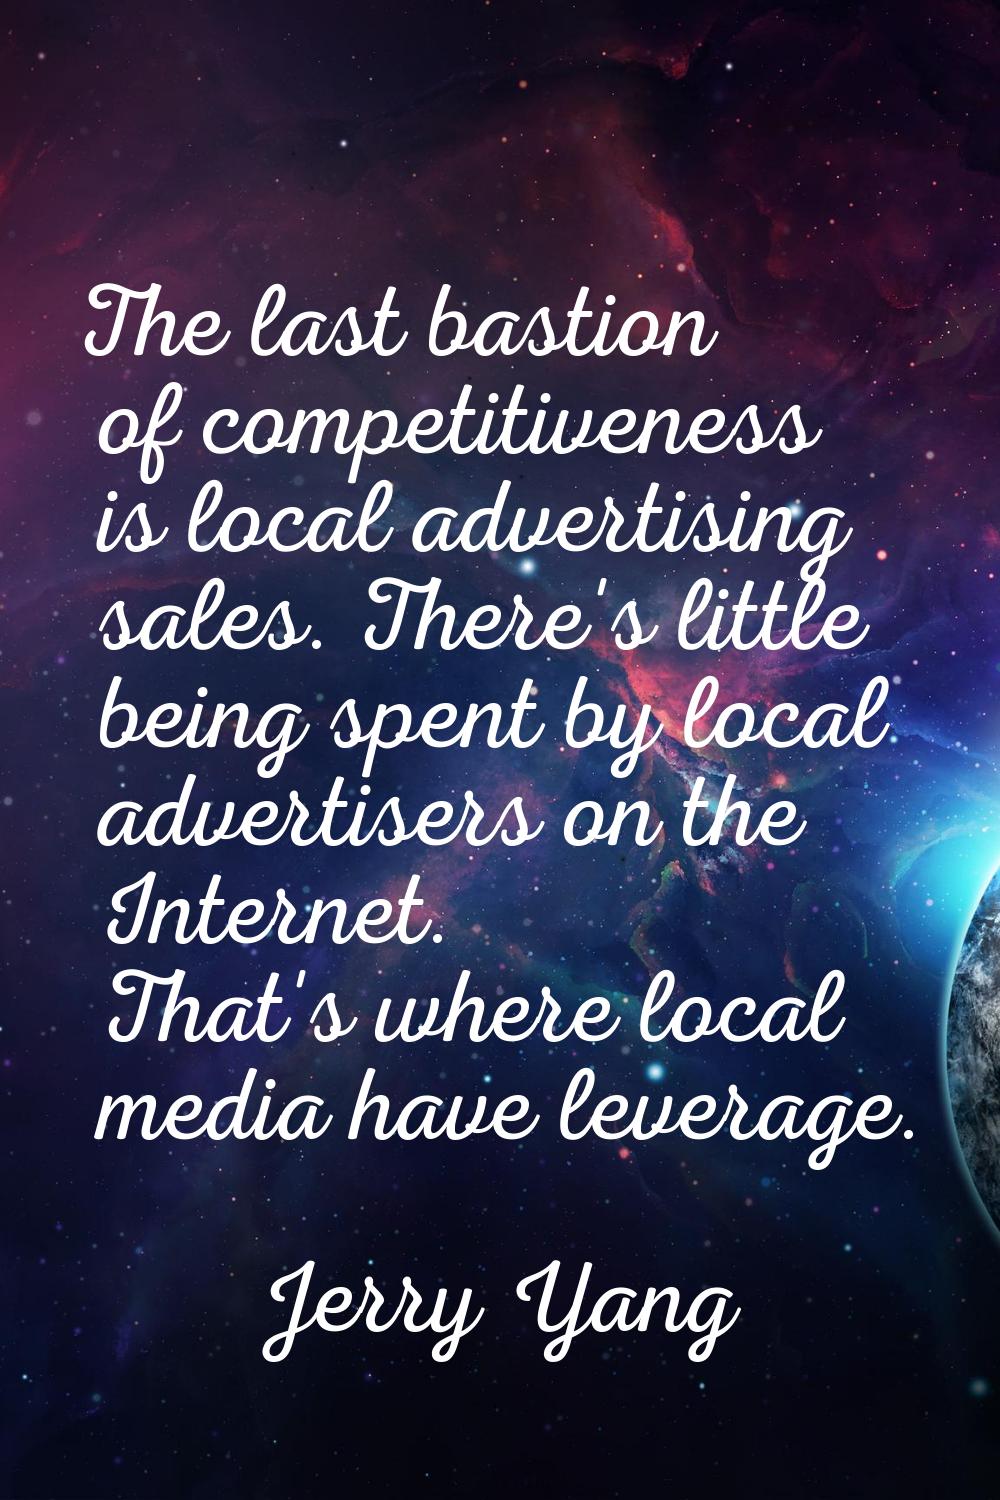 The last bastion of competitiveness is local advertising sales. There's little being spent by local